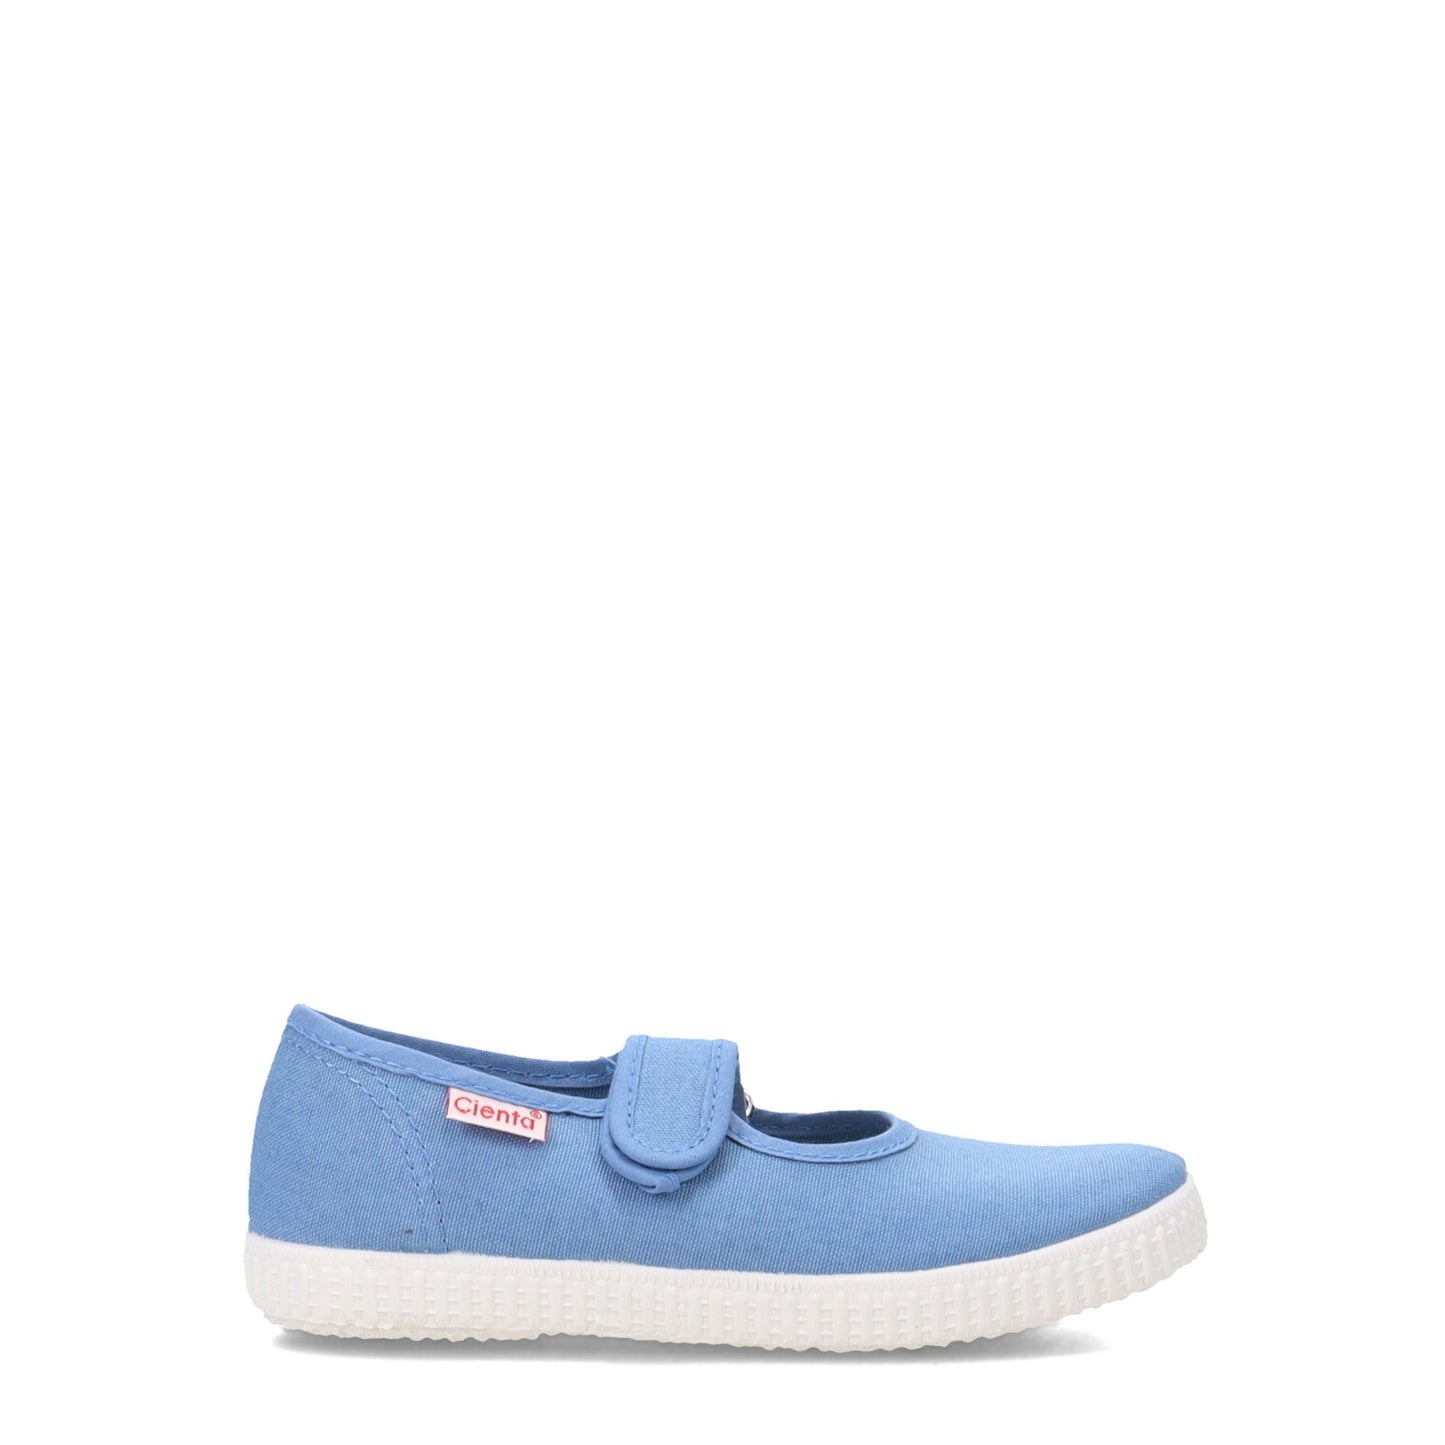 Peltz Shoes  Girl's Cienta Canvas Mary Jane Sneaker - Toddler & Little Kid FRENCH BLUE 56000.90